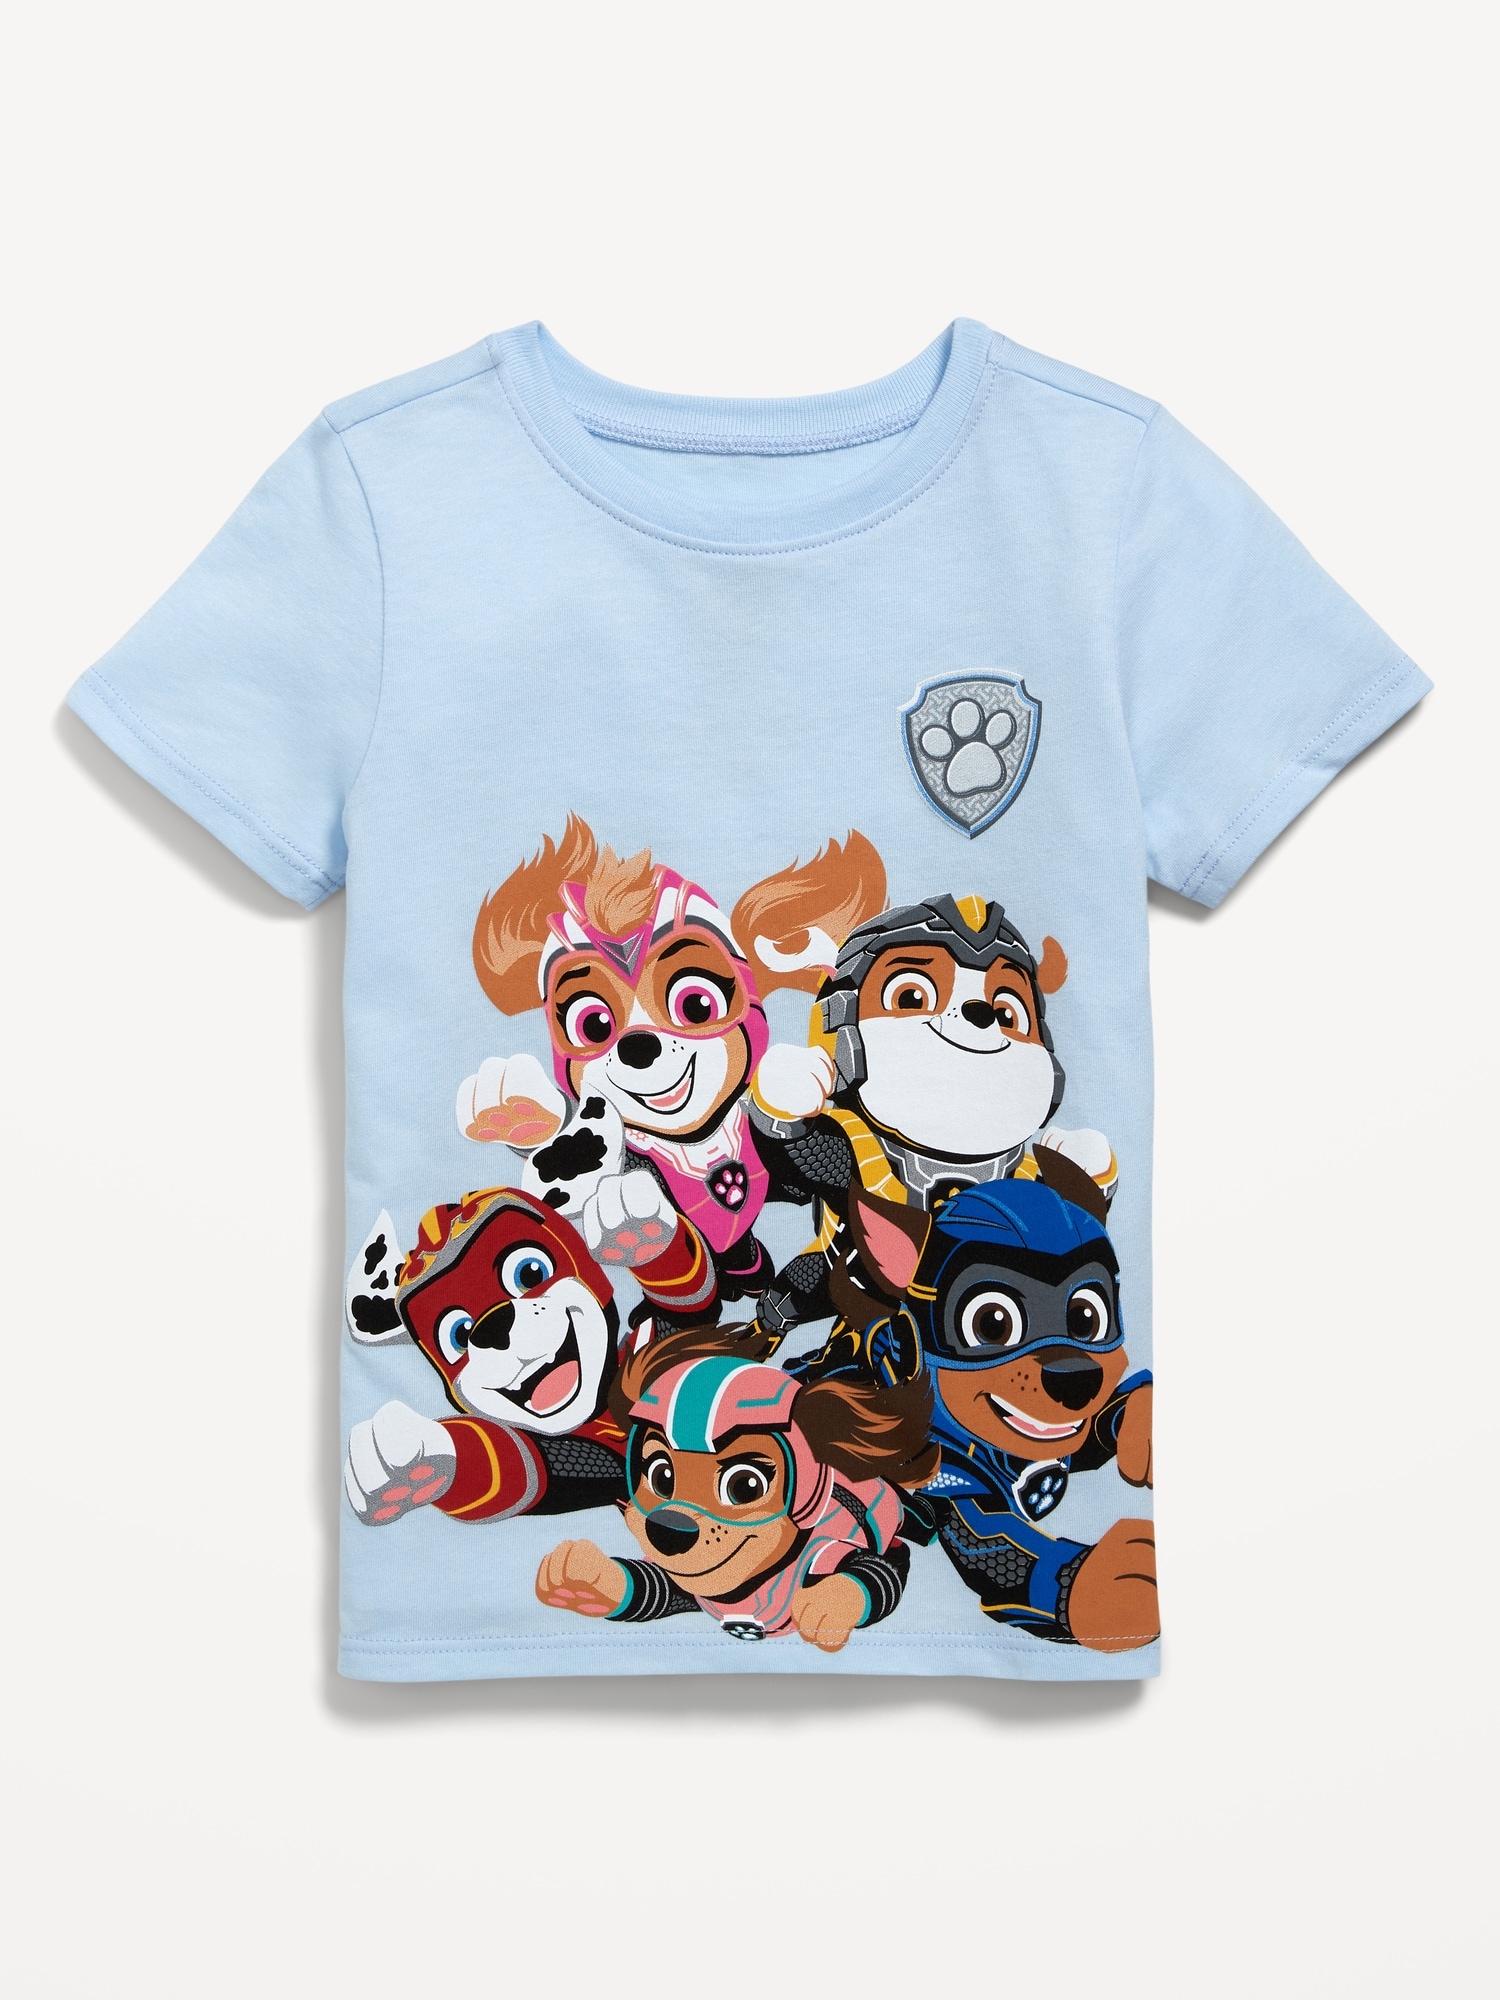 Paw Patrol™ for T-Shirt Graphic | Toddler Old Navy Unisex